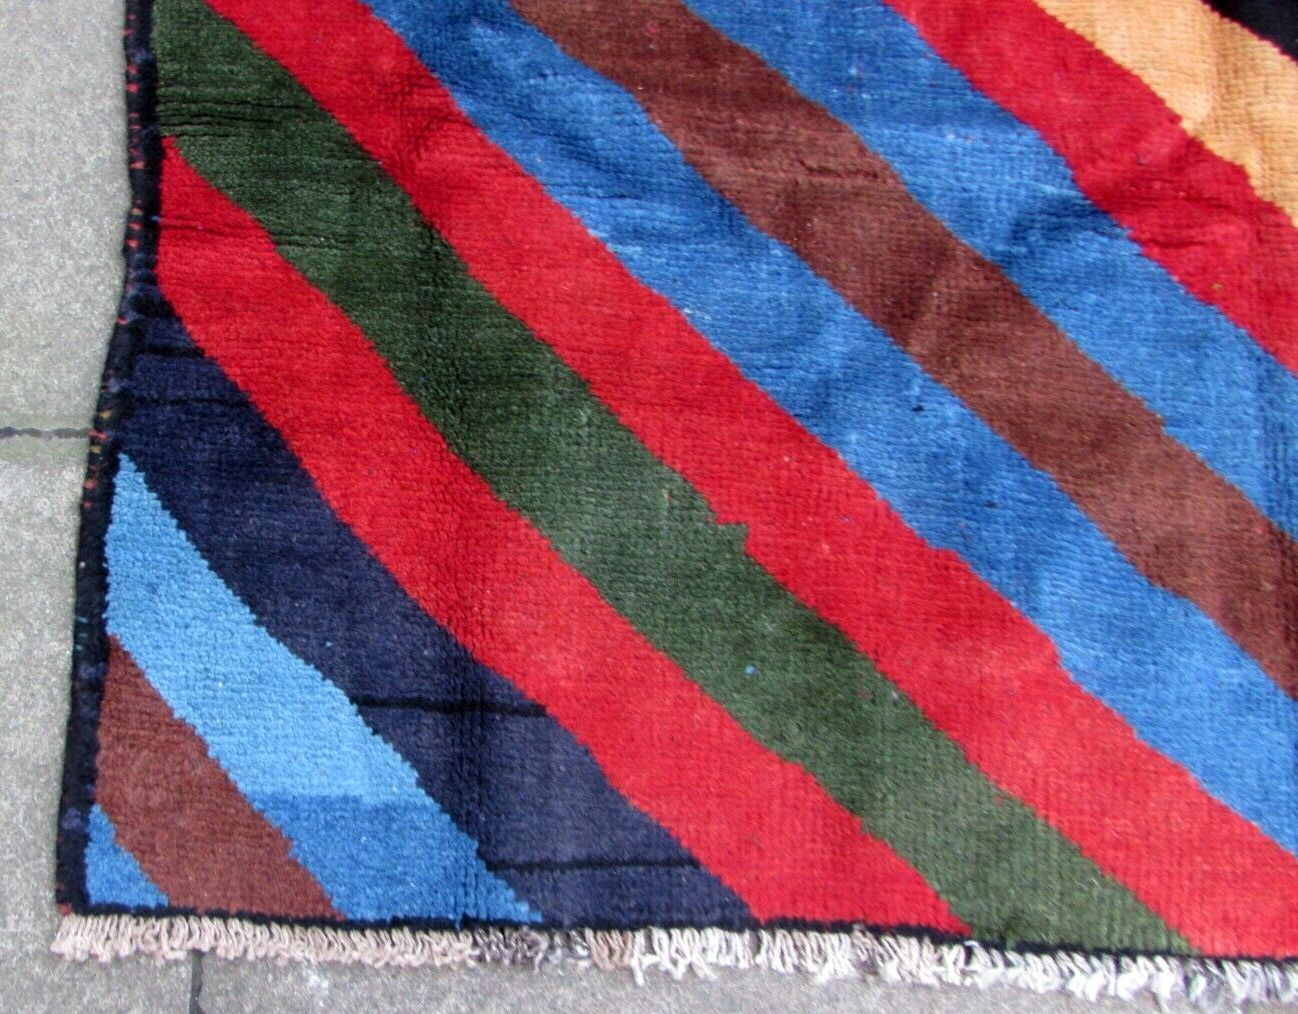 Handmade vintage Persian Gabbeh rug in colorful geometric striped design. The rug is from the end of 20th century in original good condition.